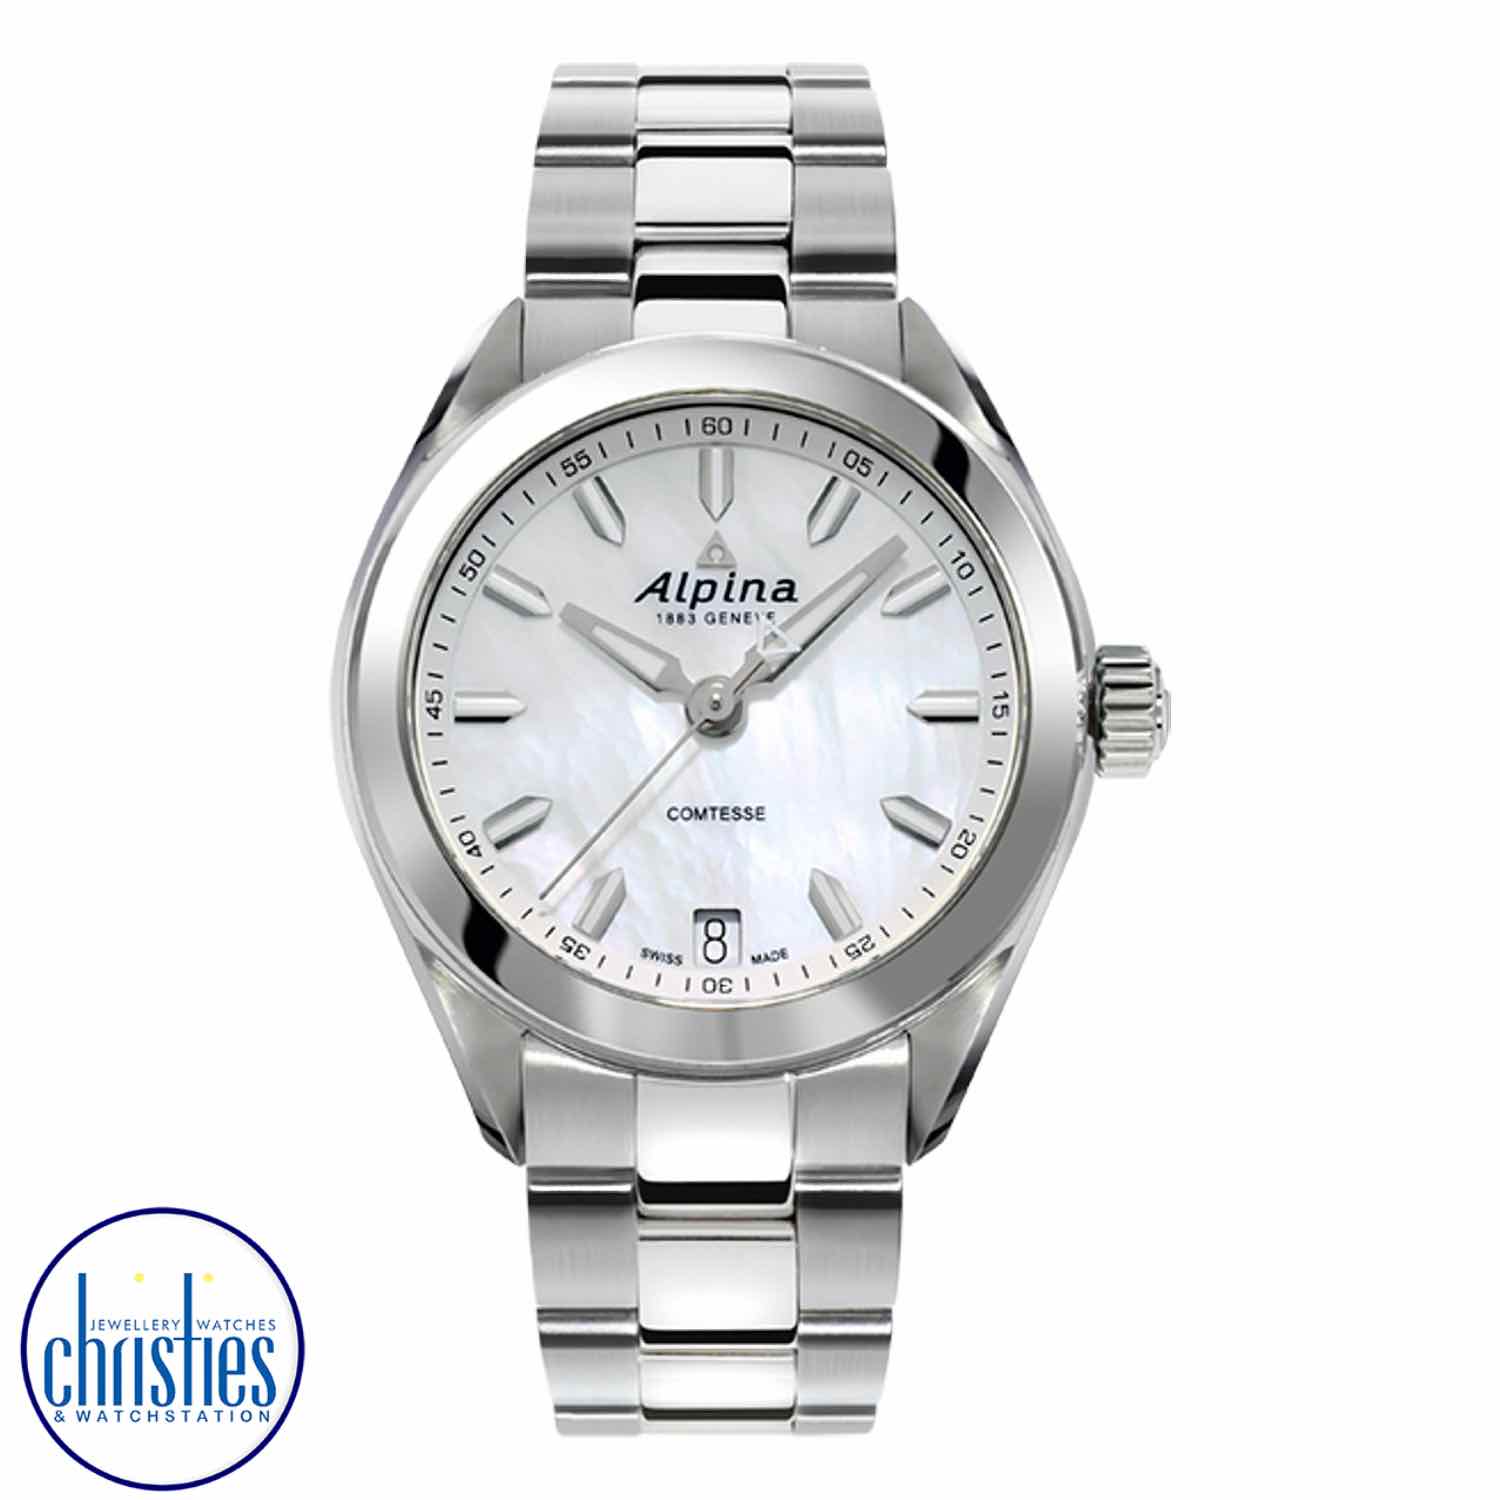 AL-240MPW2C6B Alpina Comtesse Quartz Mother of Pearl Dial Ladies Watch. From the very beginning, as far back as 1883, Alpina has been associated with horological innovation.